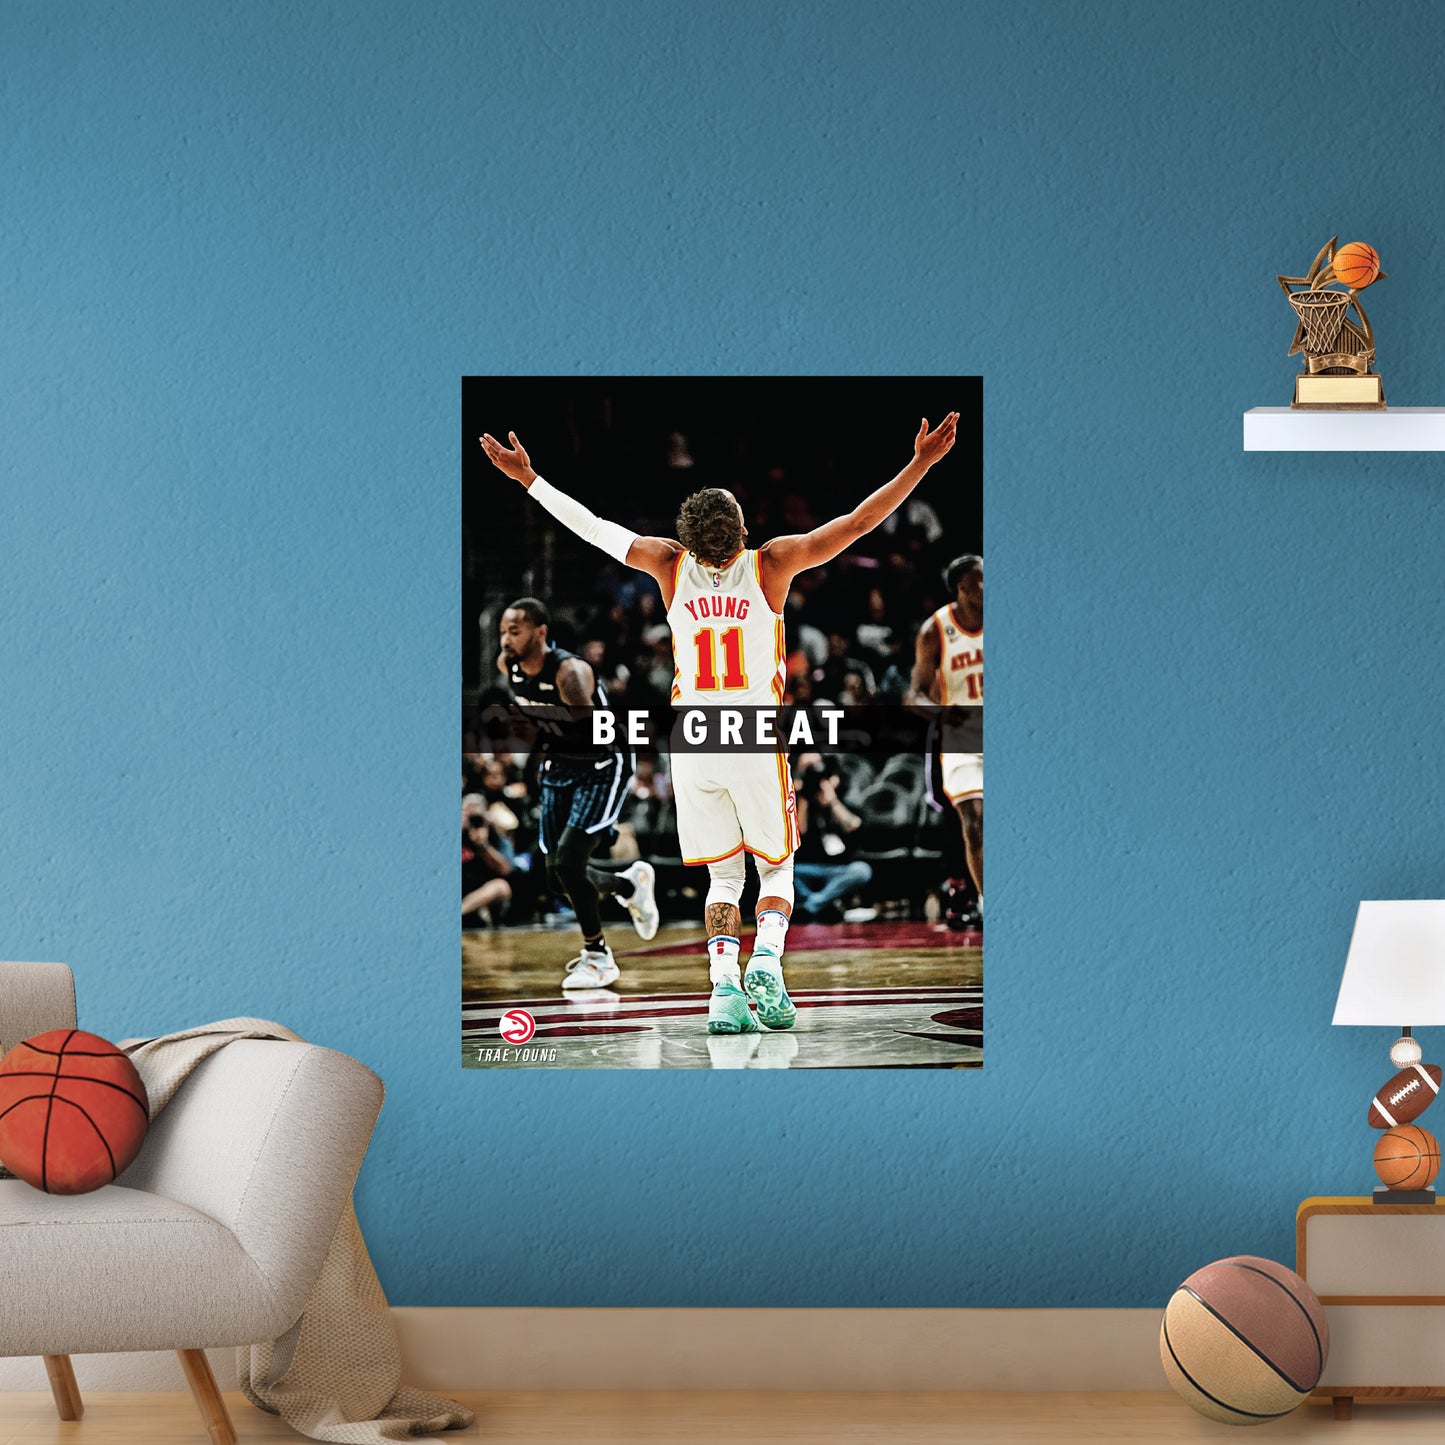 Atlanta Hawks: Trae Young Greatness Motivational Poster - Officially Licensed NBA Removable Adhesive Decal